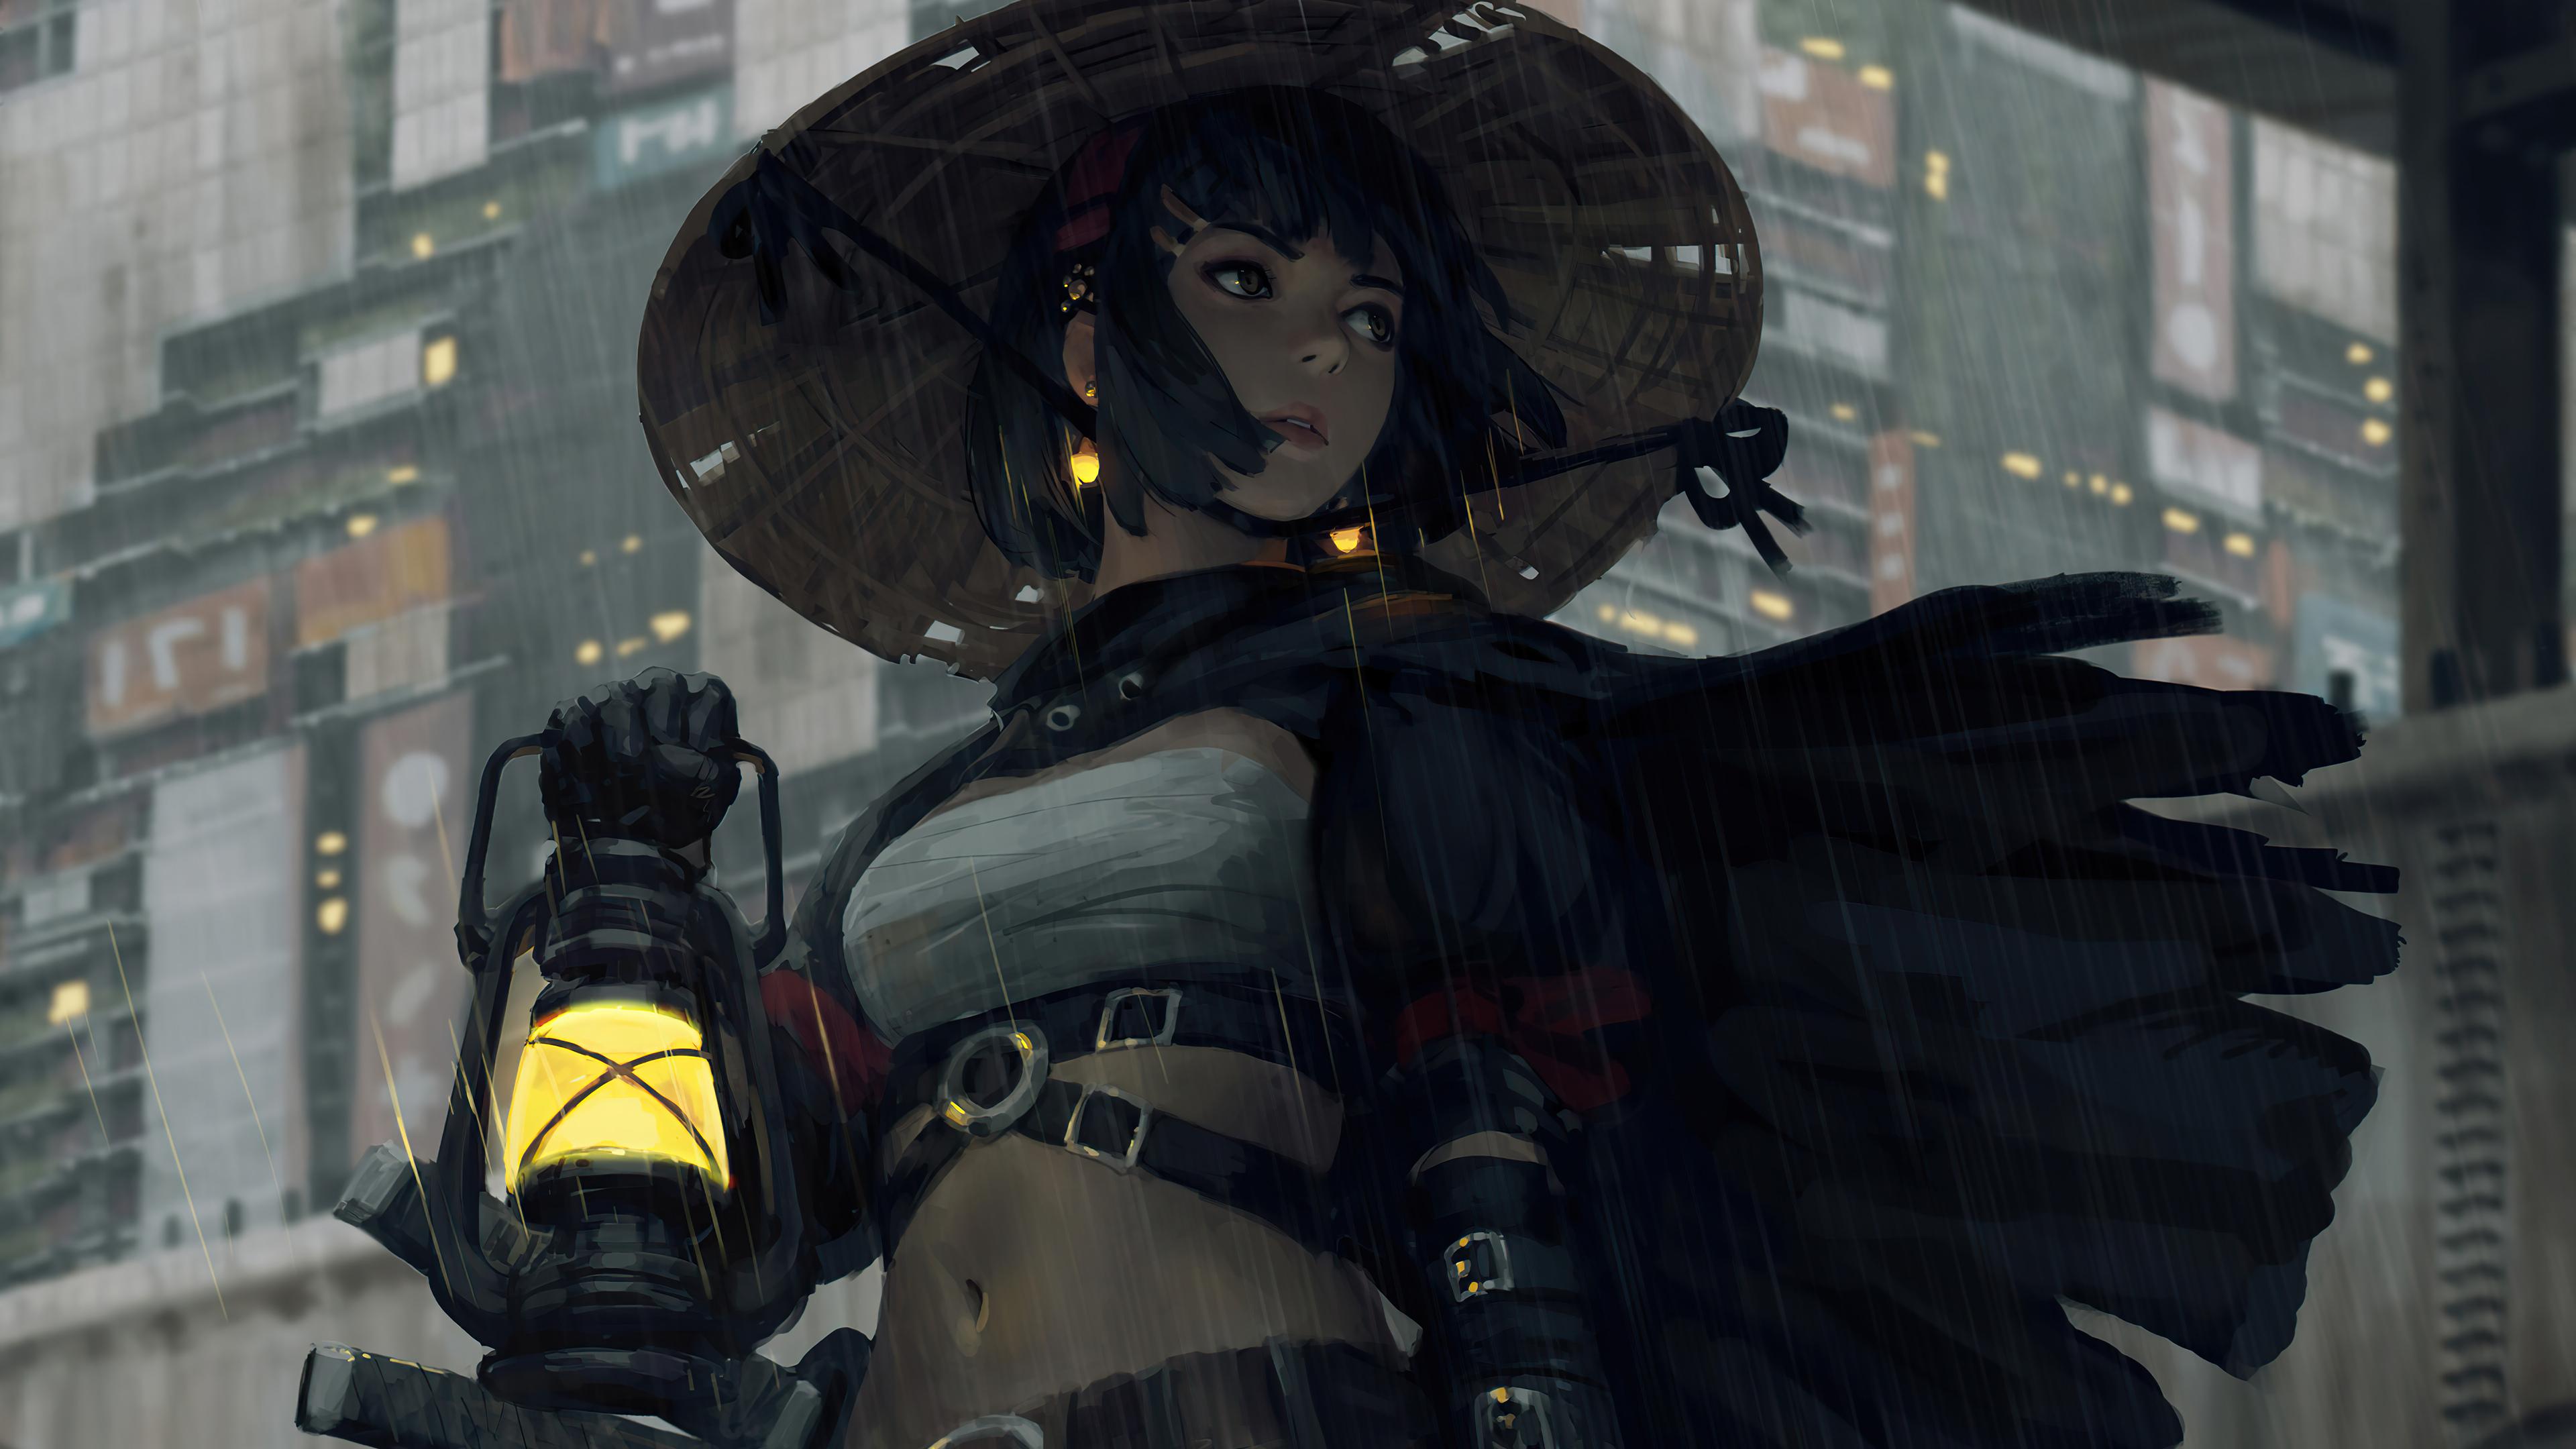 Samurai 4k Wallpapers For Your Desktop Or Mobile Screen Free And Easy To Download